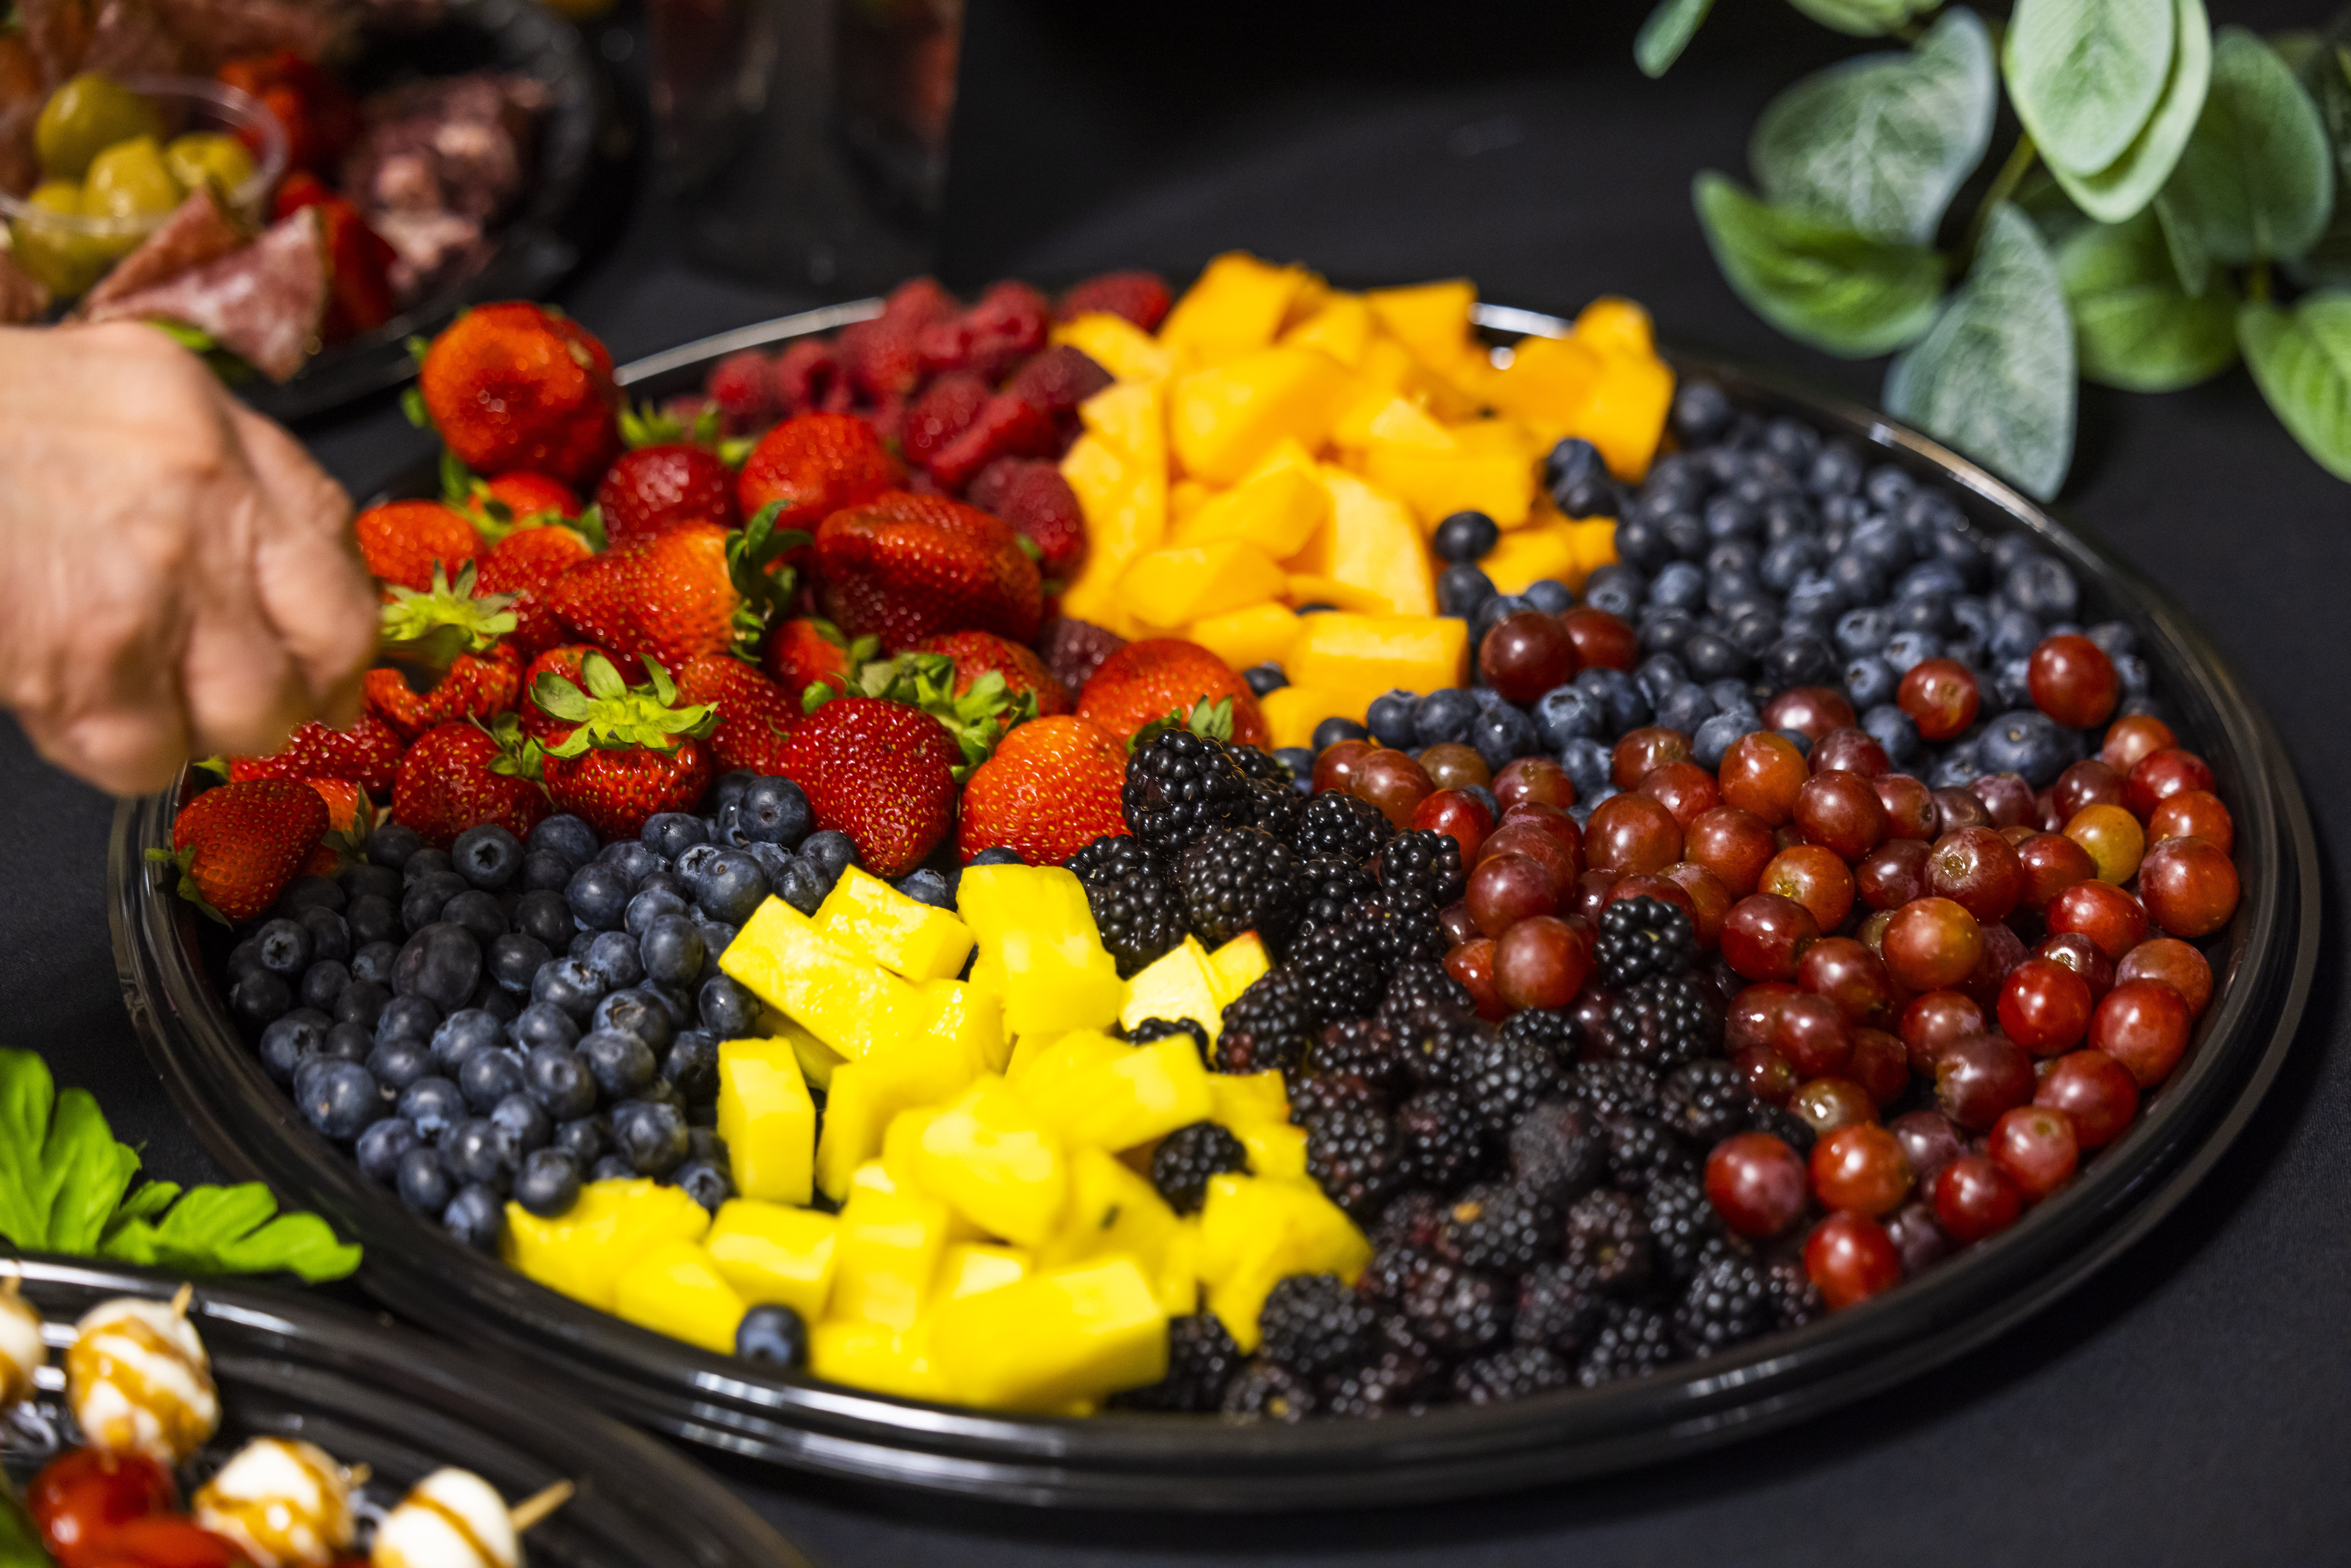 A plate of assorted fresh fruit.